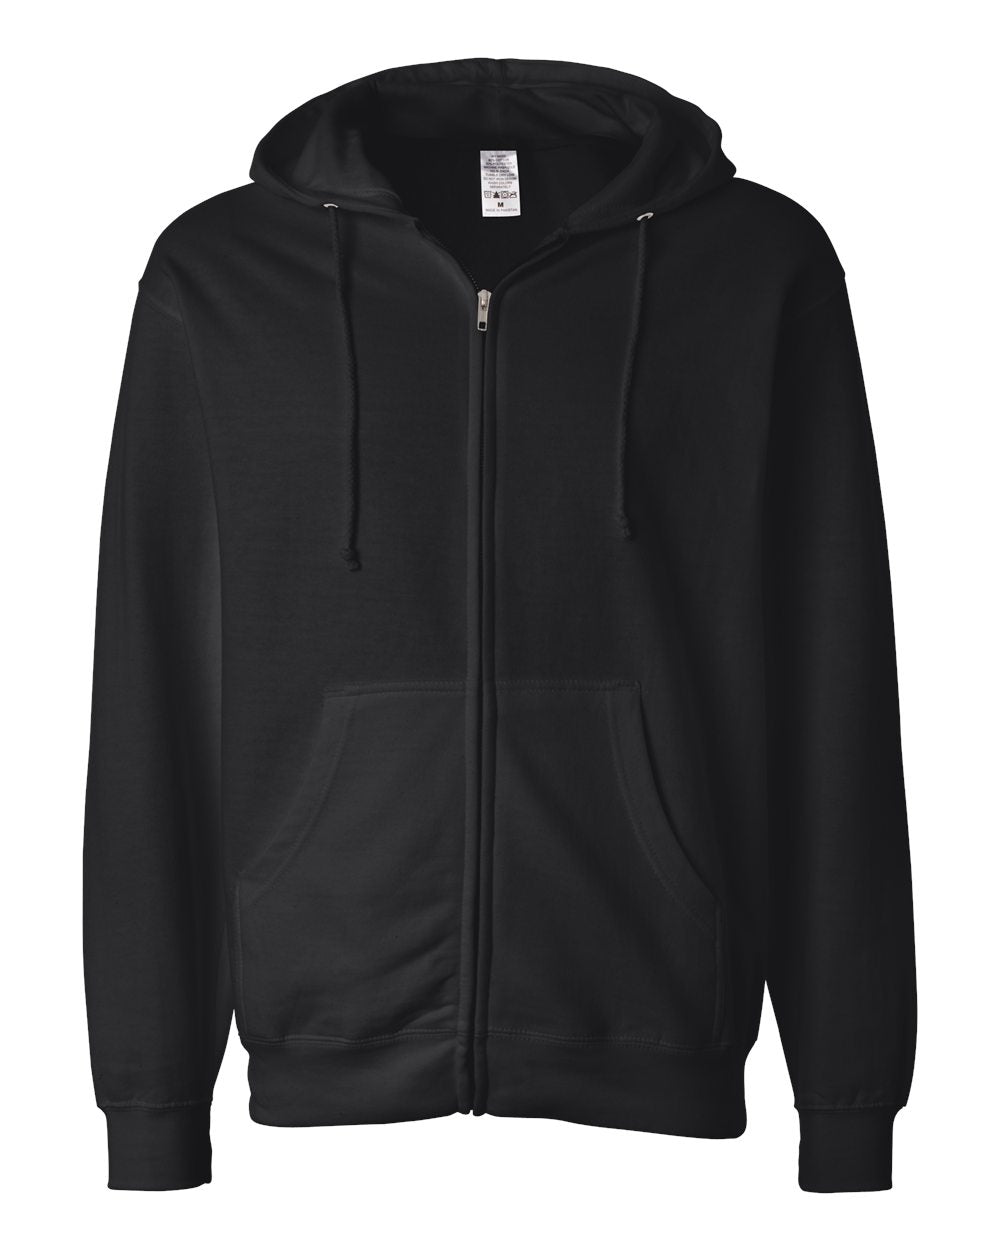 Independent Trading Co. - Midweight Full-Zip Hooded Sweatshirt - SS4500Z. XS - 3XL